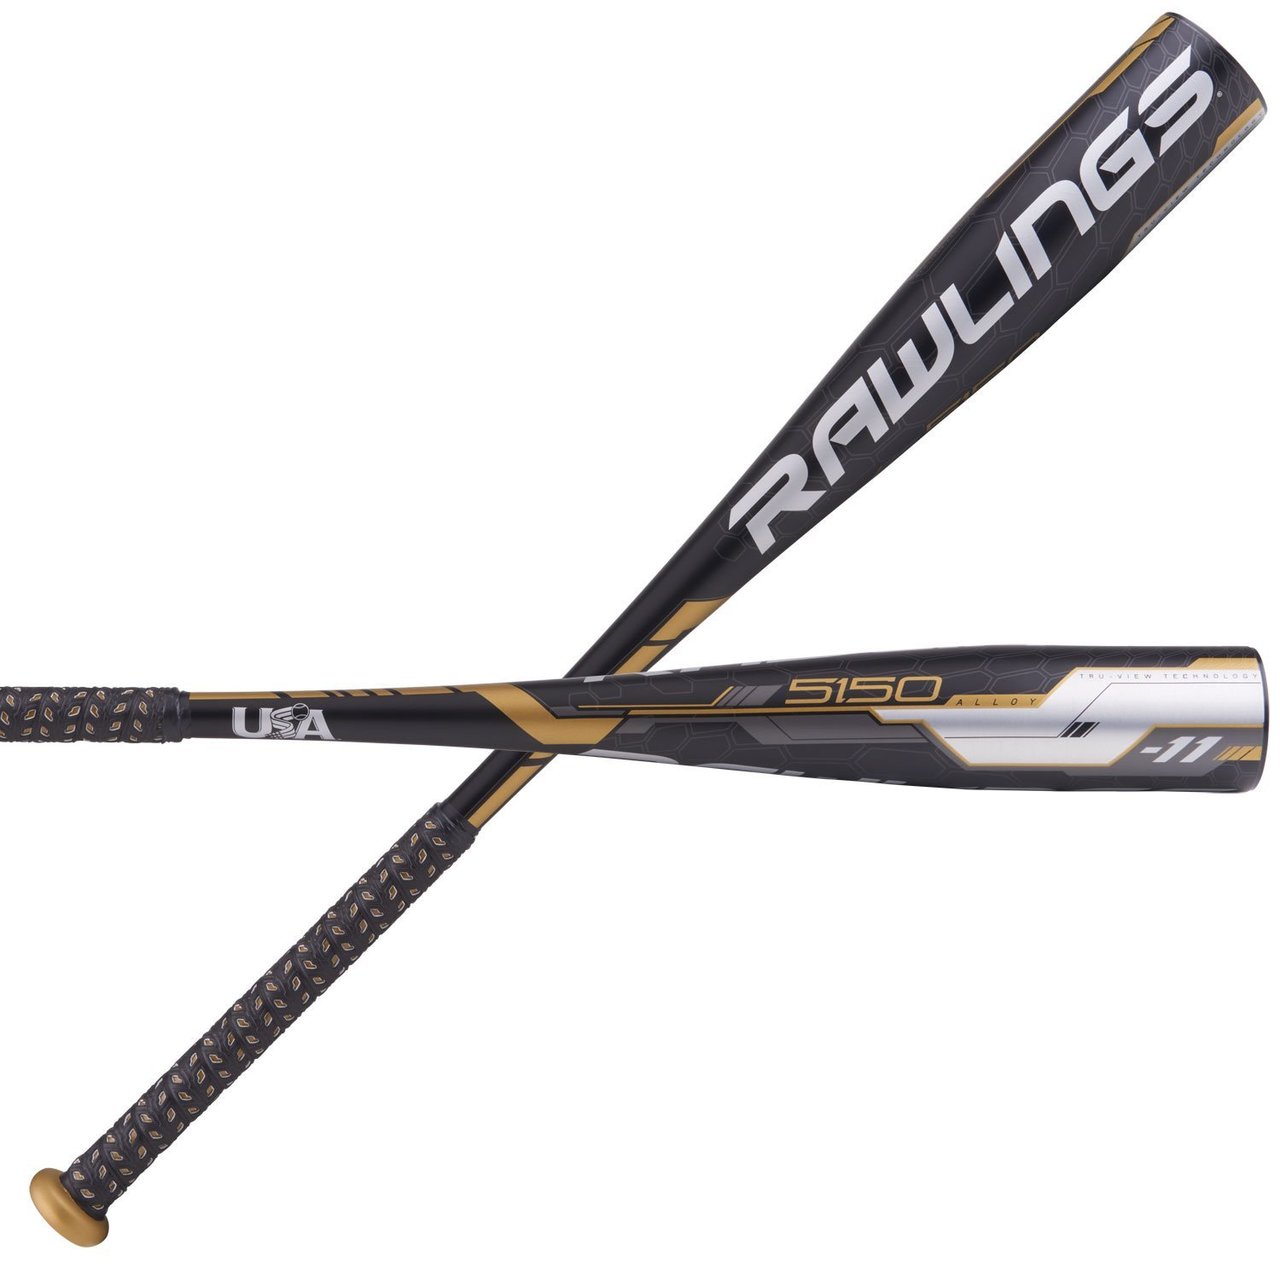 rawlings-2018-usa-baseball-bat-5150-11-29-in-18-oz US8511-2918 Rawlings 083321414619 High-performance metal Baseball bat delivers exceptional pop and balance Engineered with